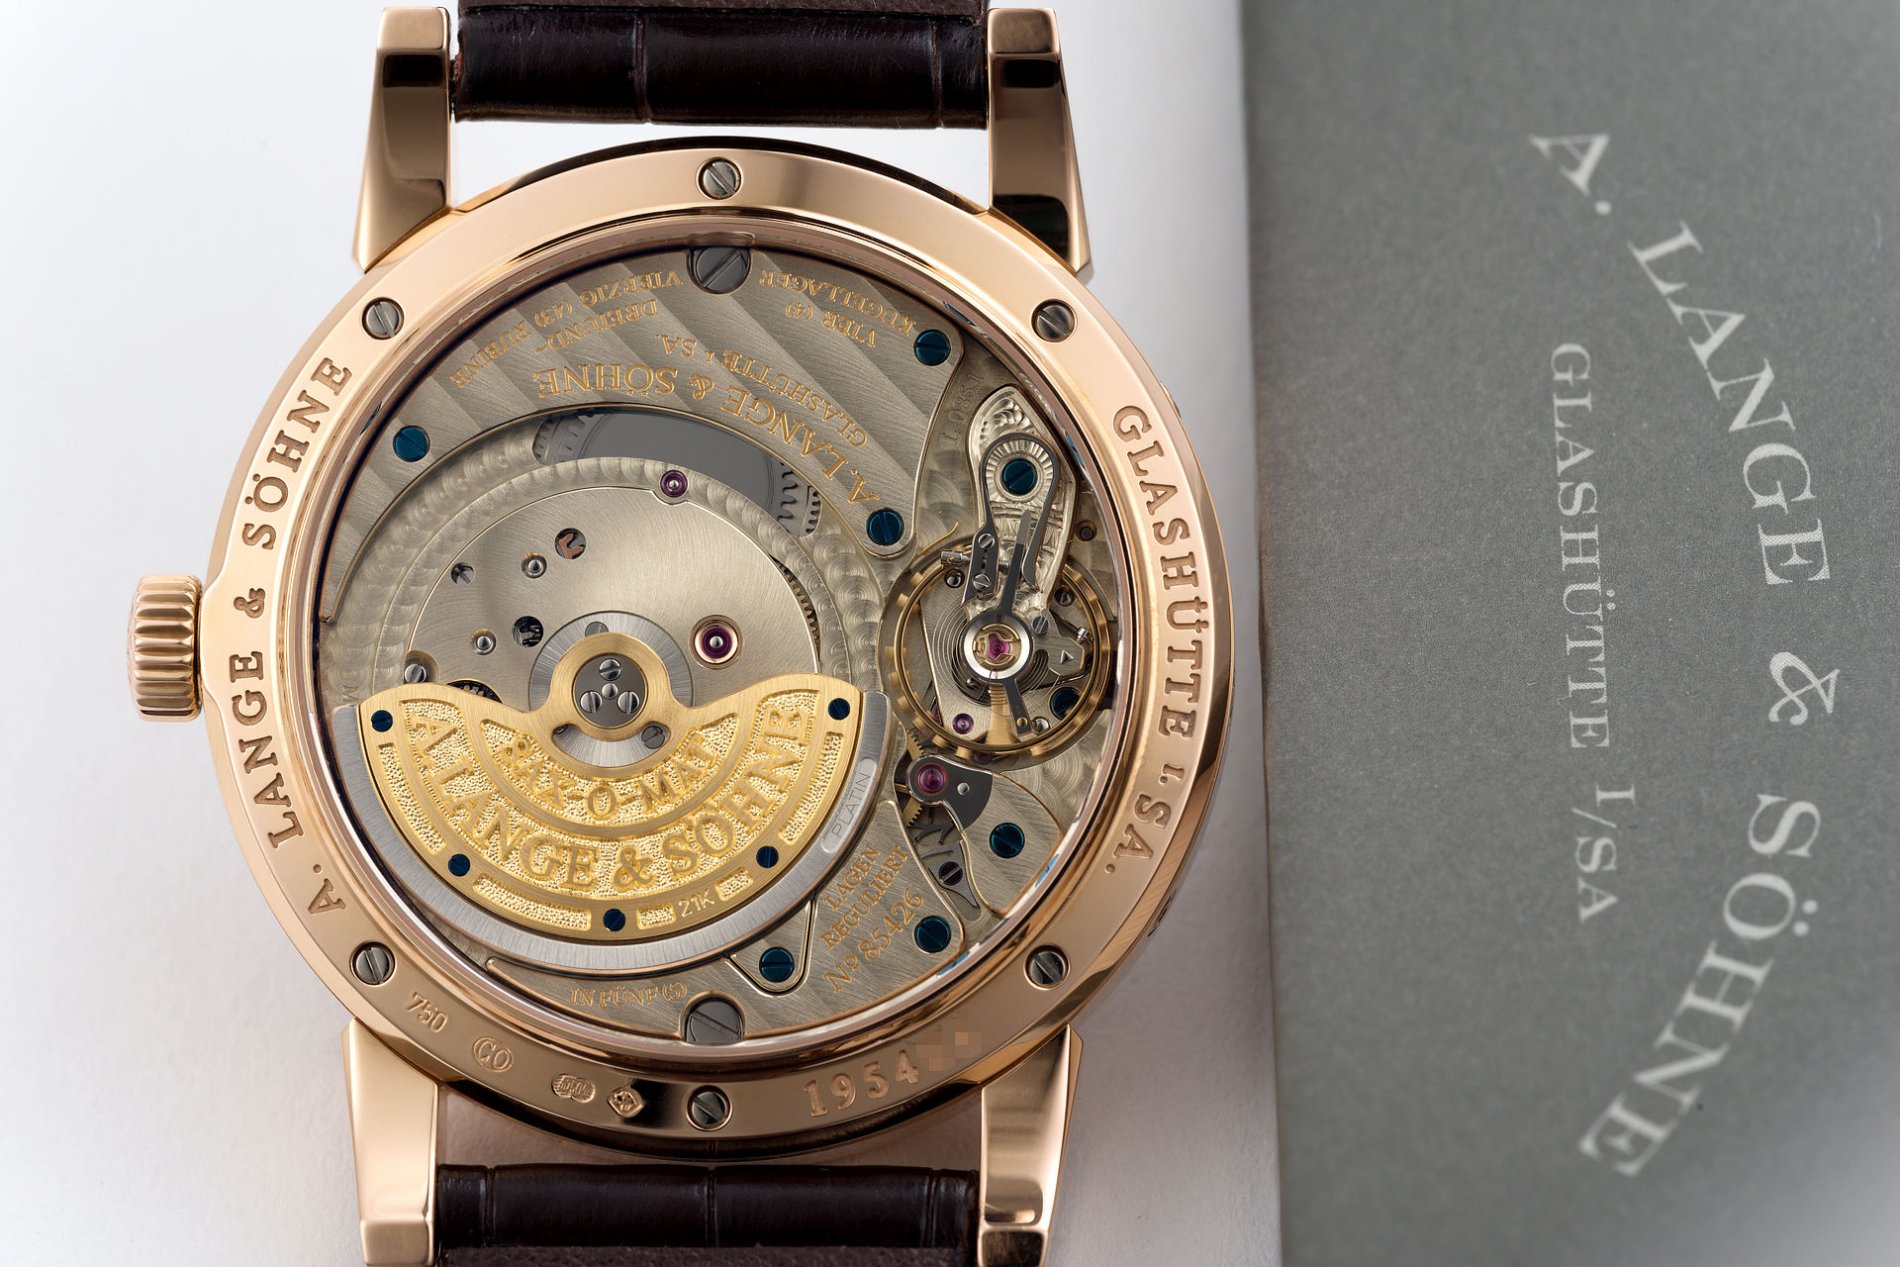   a-lange-and-sohne-saxonia-annual-calendar-385mm-18ct-rose-gold-ref-330032e-year-2011-15.jpeg